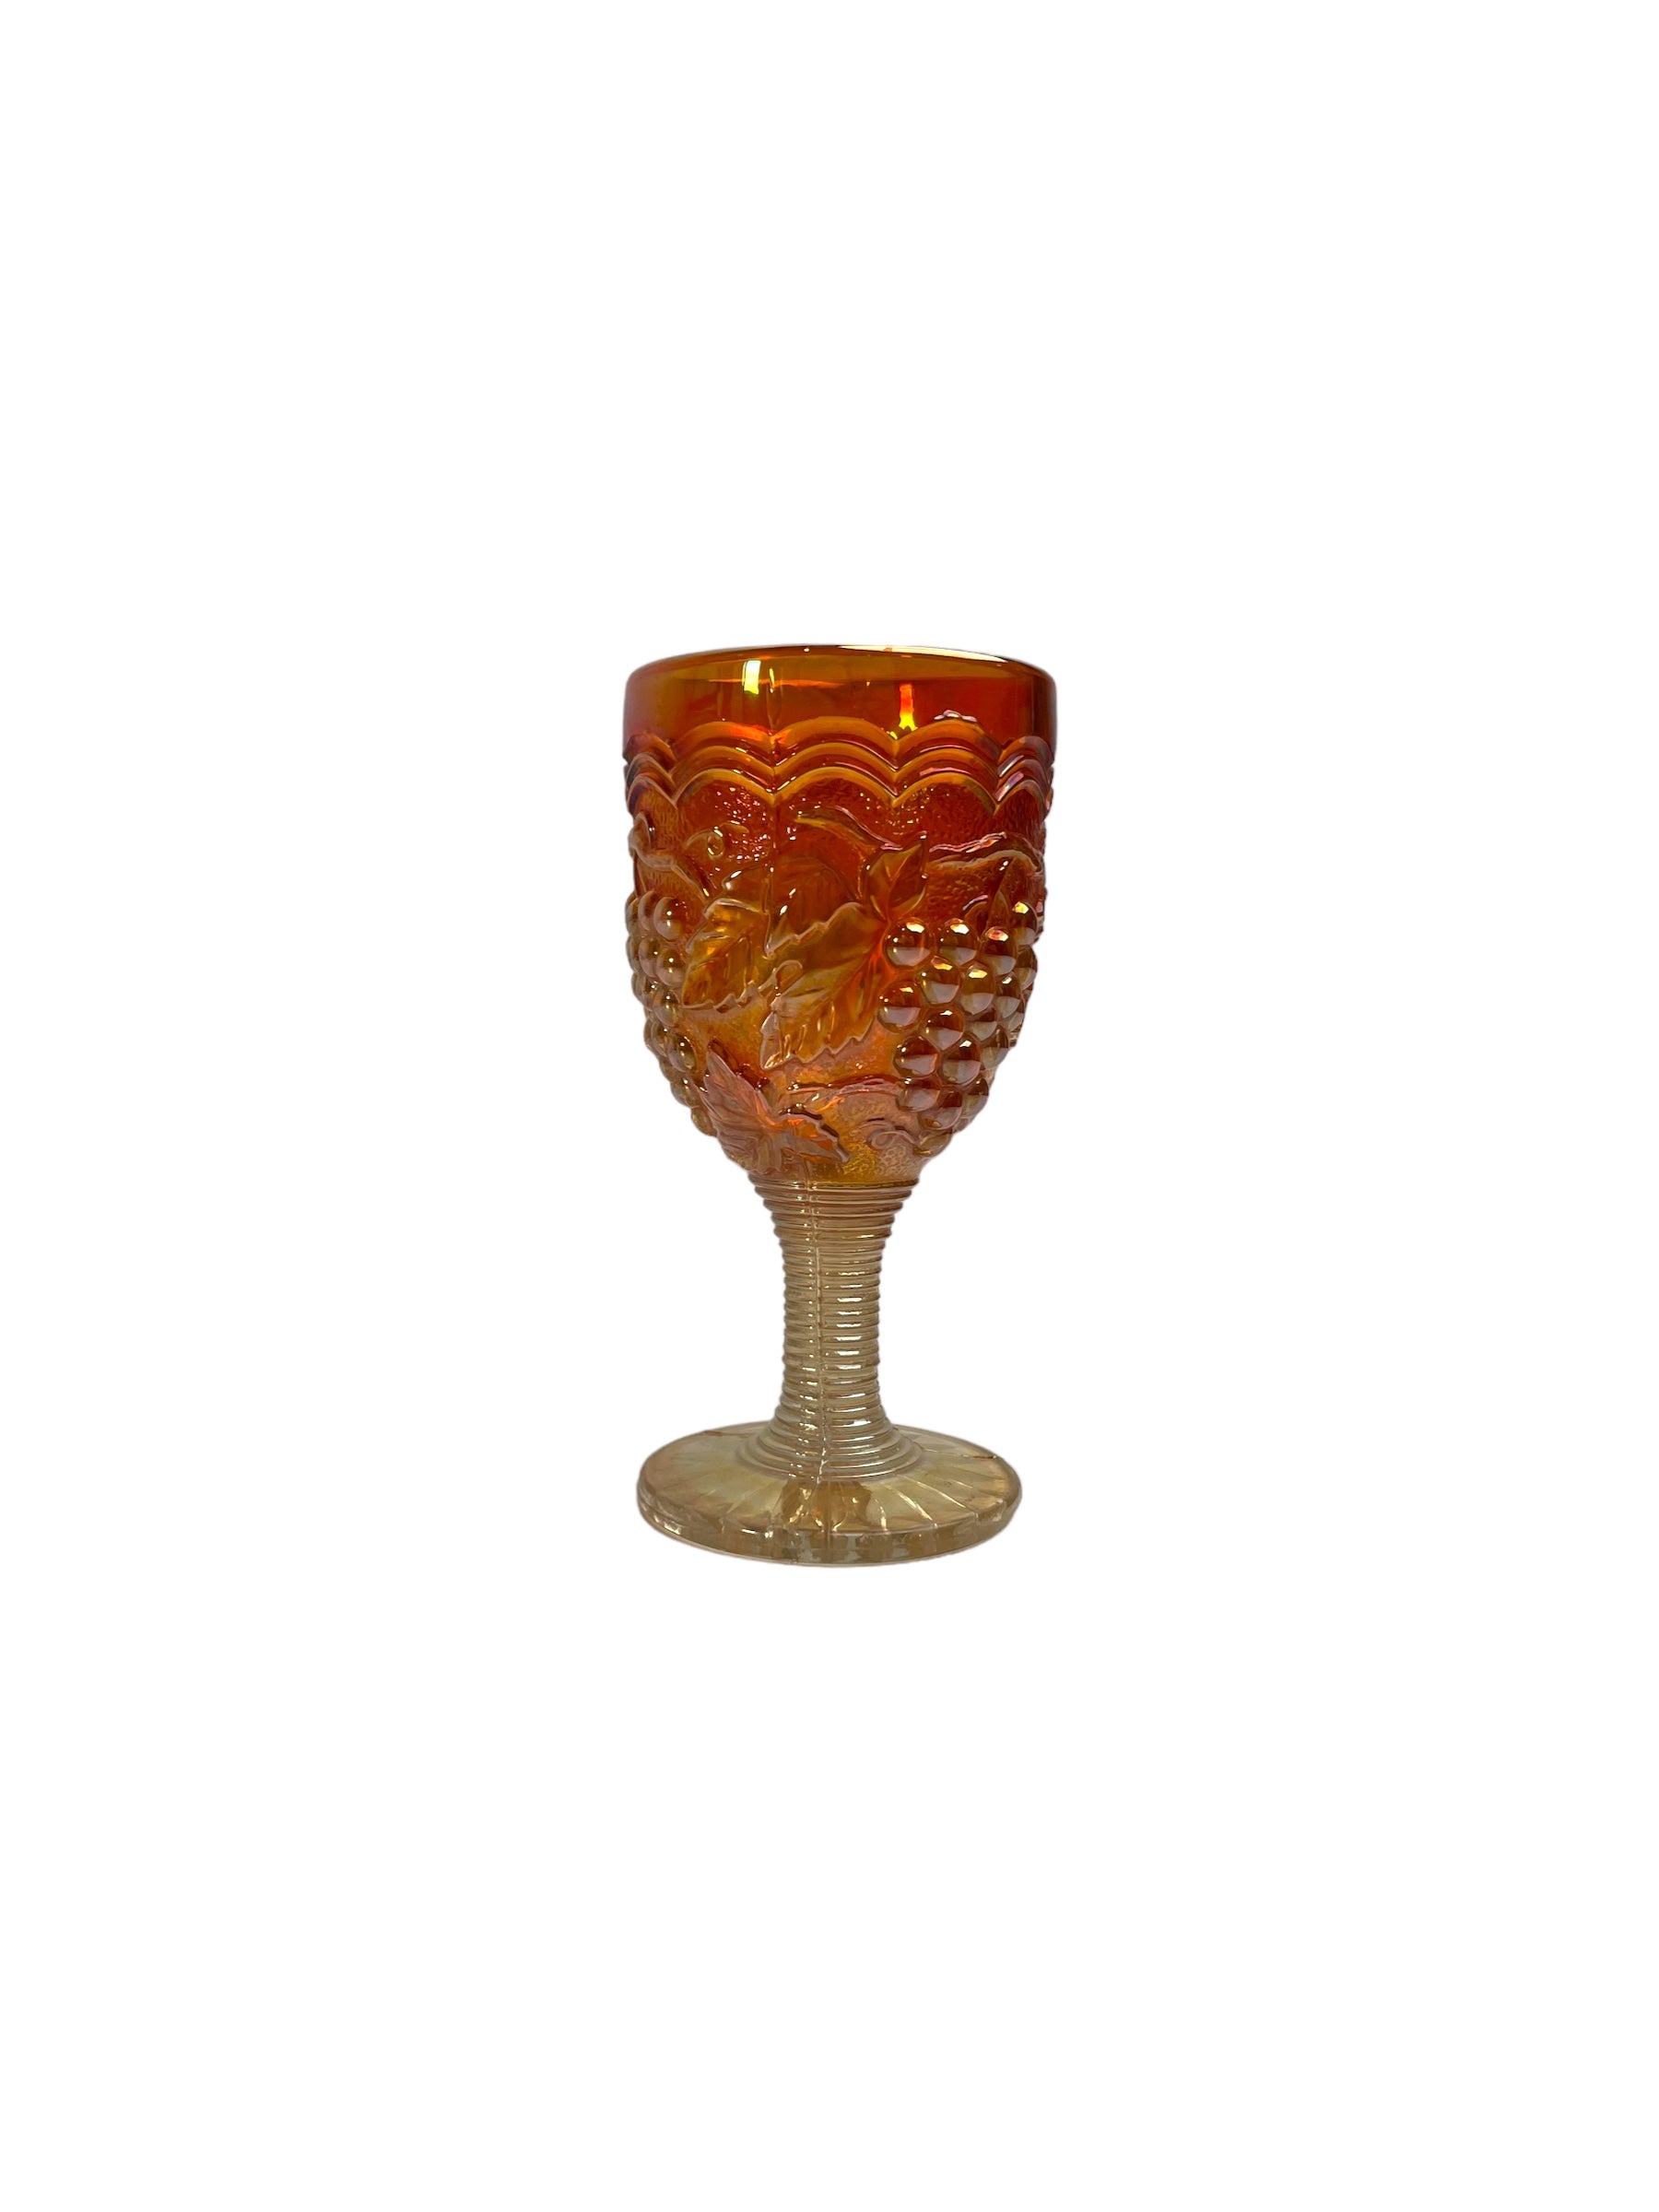 Set of 4 IMPERIAL Marigold Carnival Glass Grapes Wine Goblets